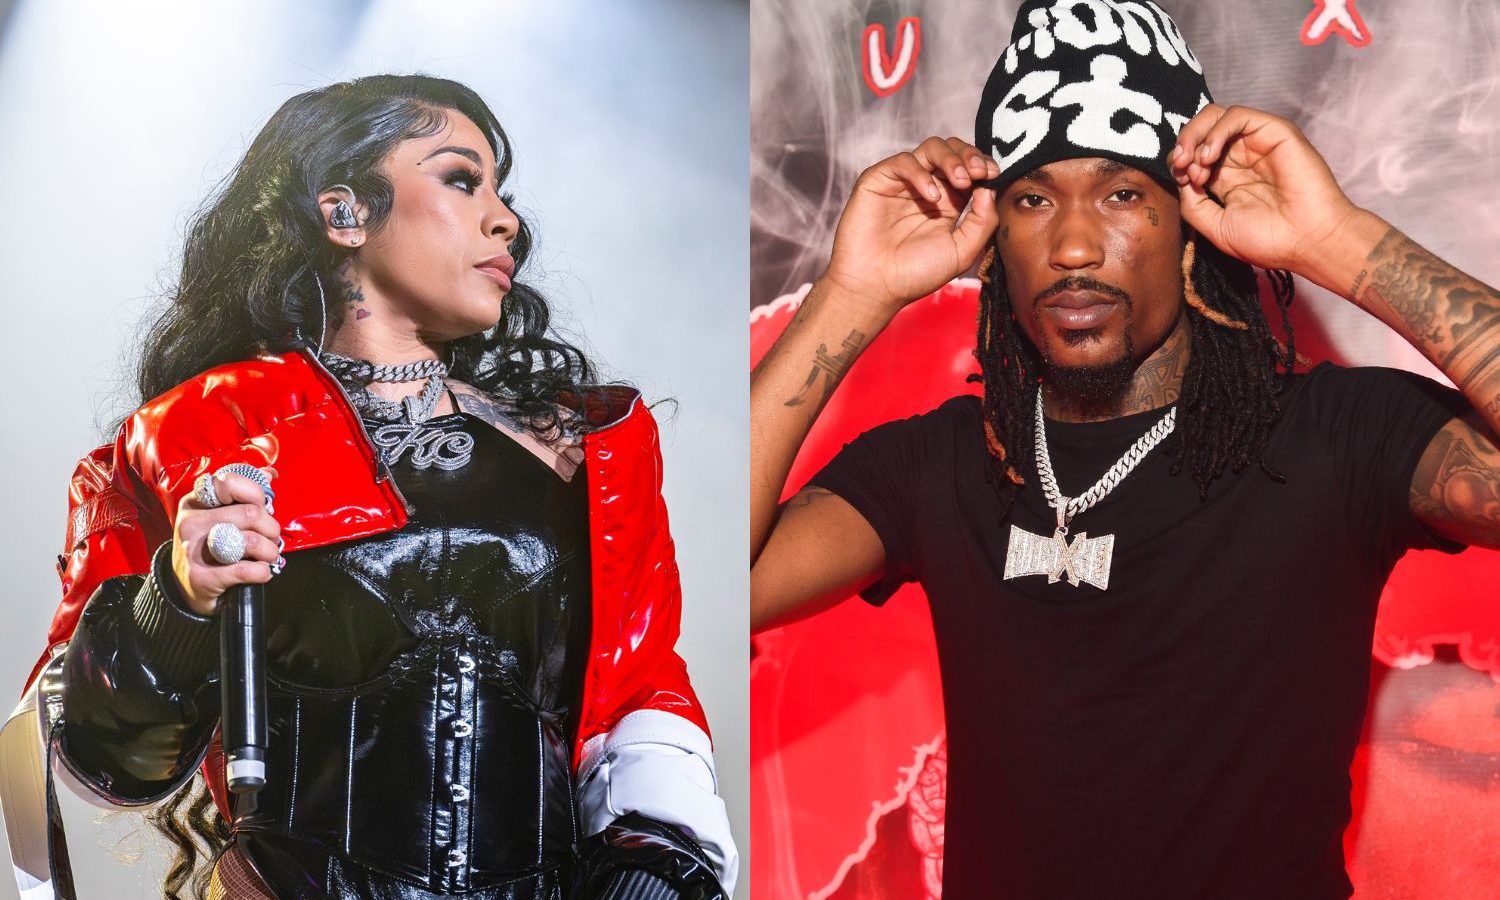 Keyshia Cole Reacts To Resurfaced Video Of Hunxho’s “Settling Down” Comments